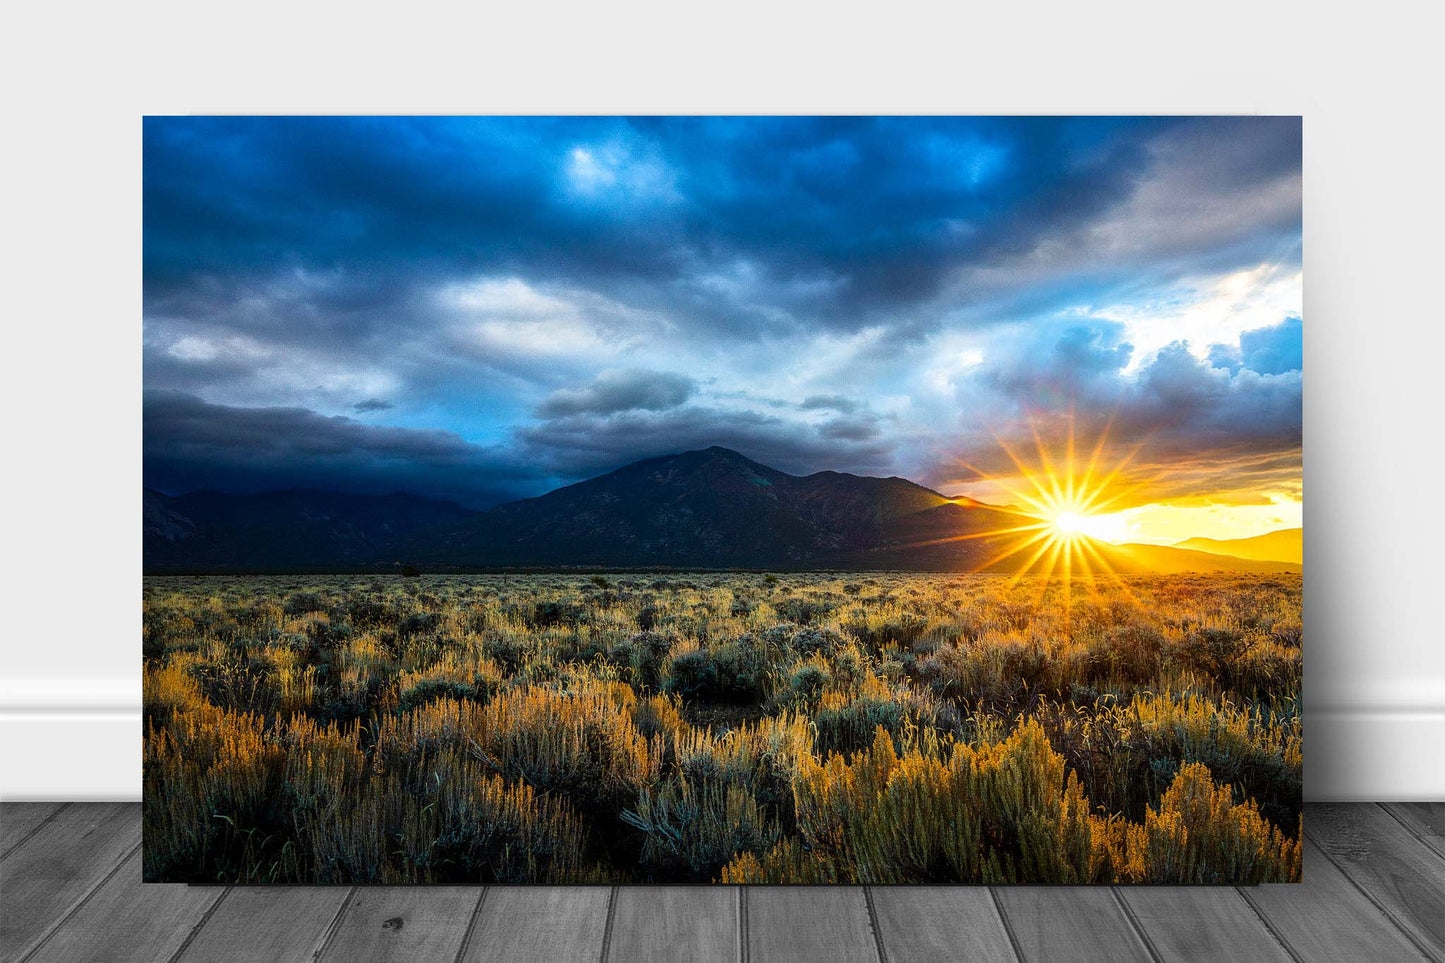 High desert landscape metal print wall art of the sun twinkling behind Taos Mountain as storm clouds move through over sagebrush on an autumn morning near Taos, New Mexico by Sean Ramsey of Southern Plains Photography.